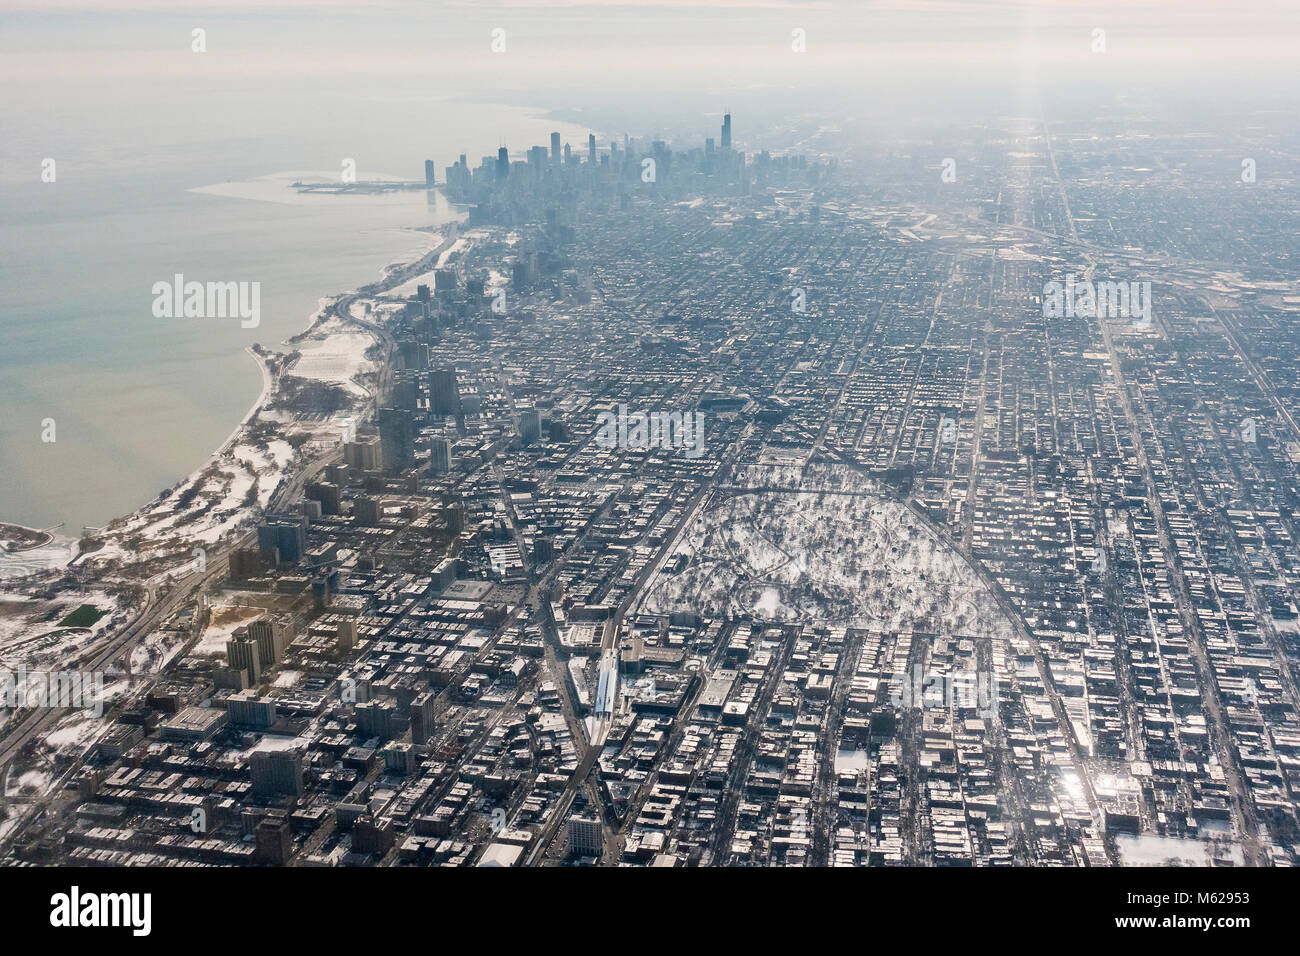 Downtown Chicago from air (Chicago areal) - Illinois USA Stock Photo